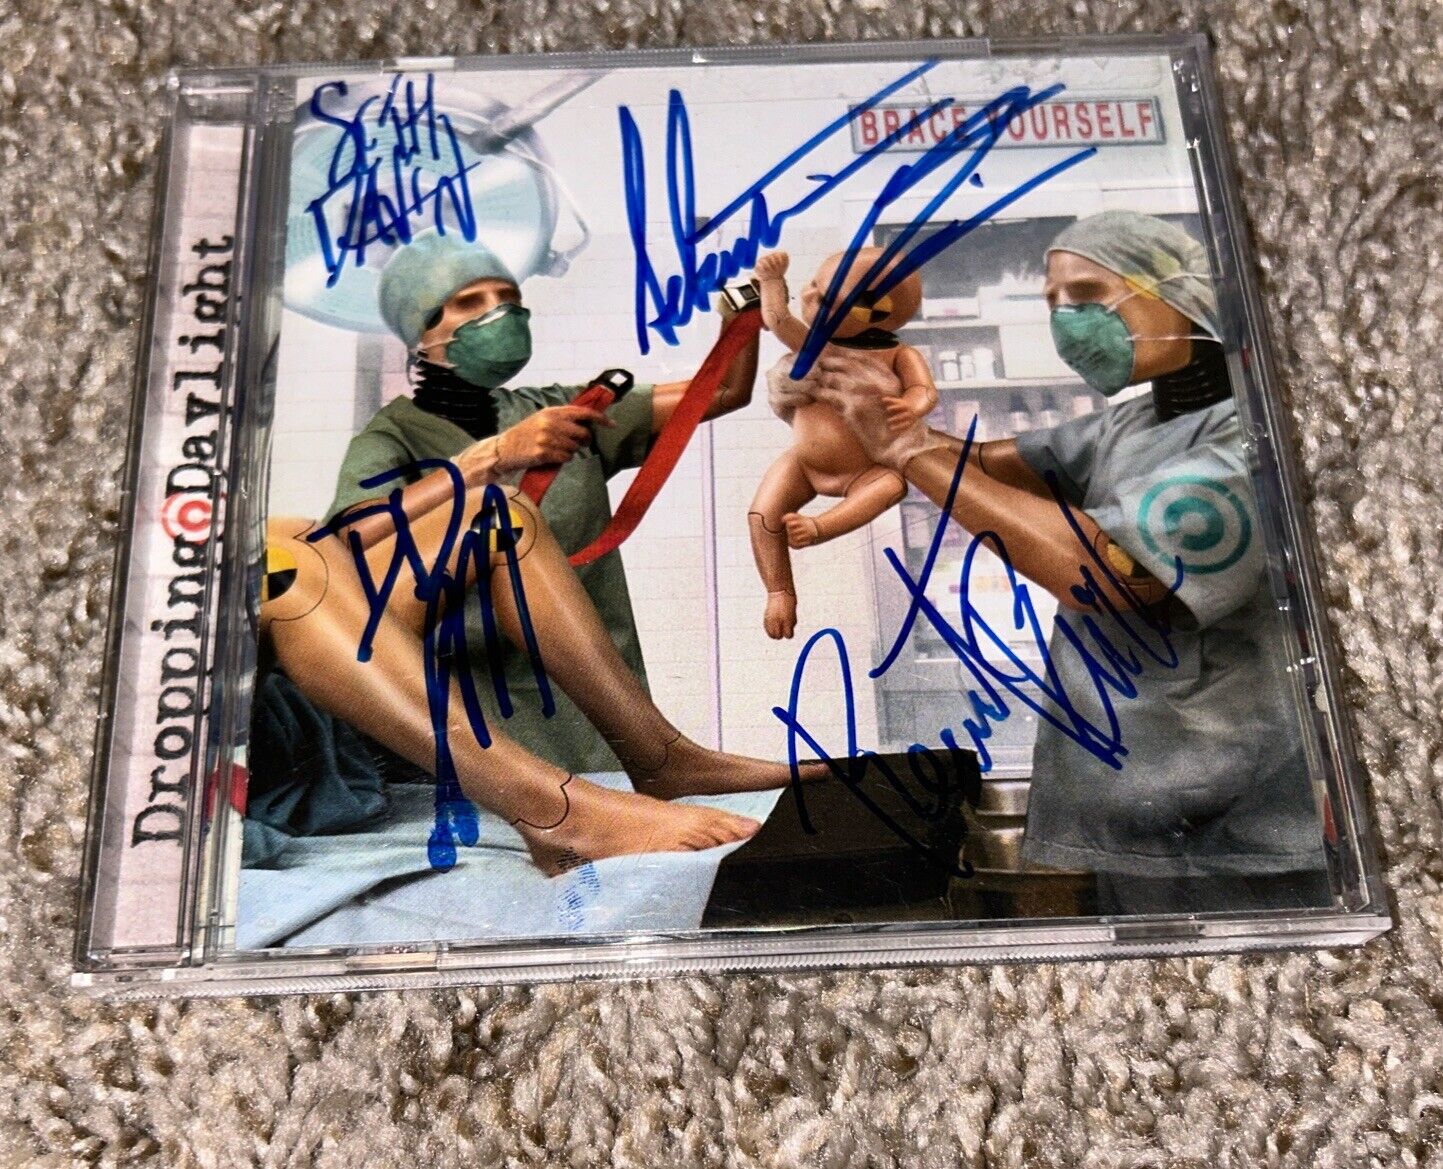 Dropping Daylight - Brace Yourself  CD Signed Autographed By The Full Band